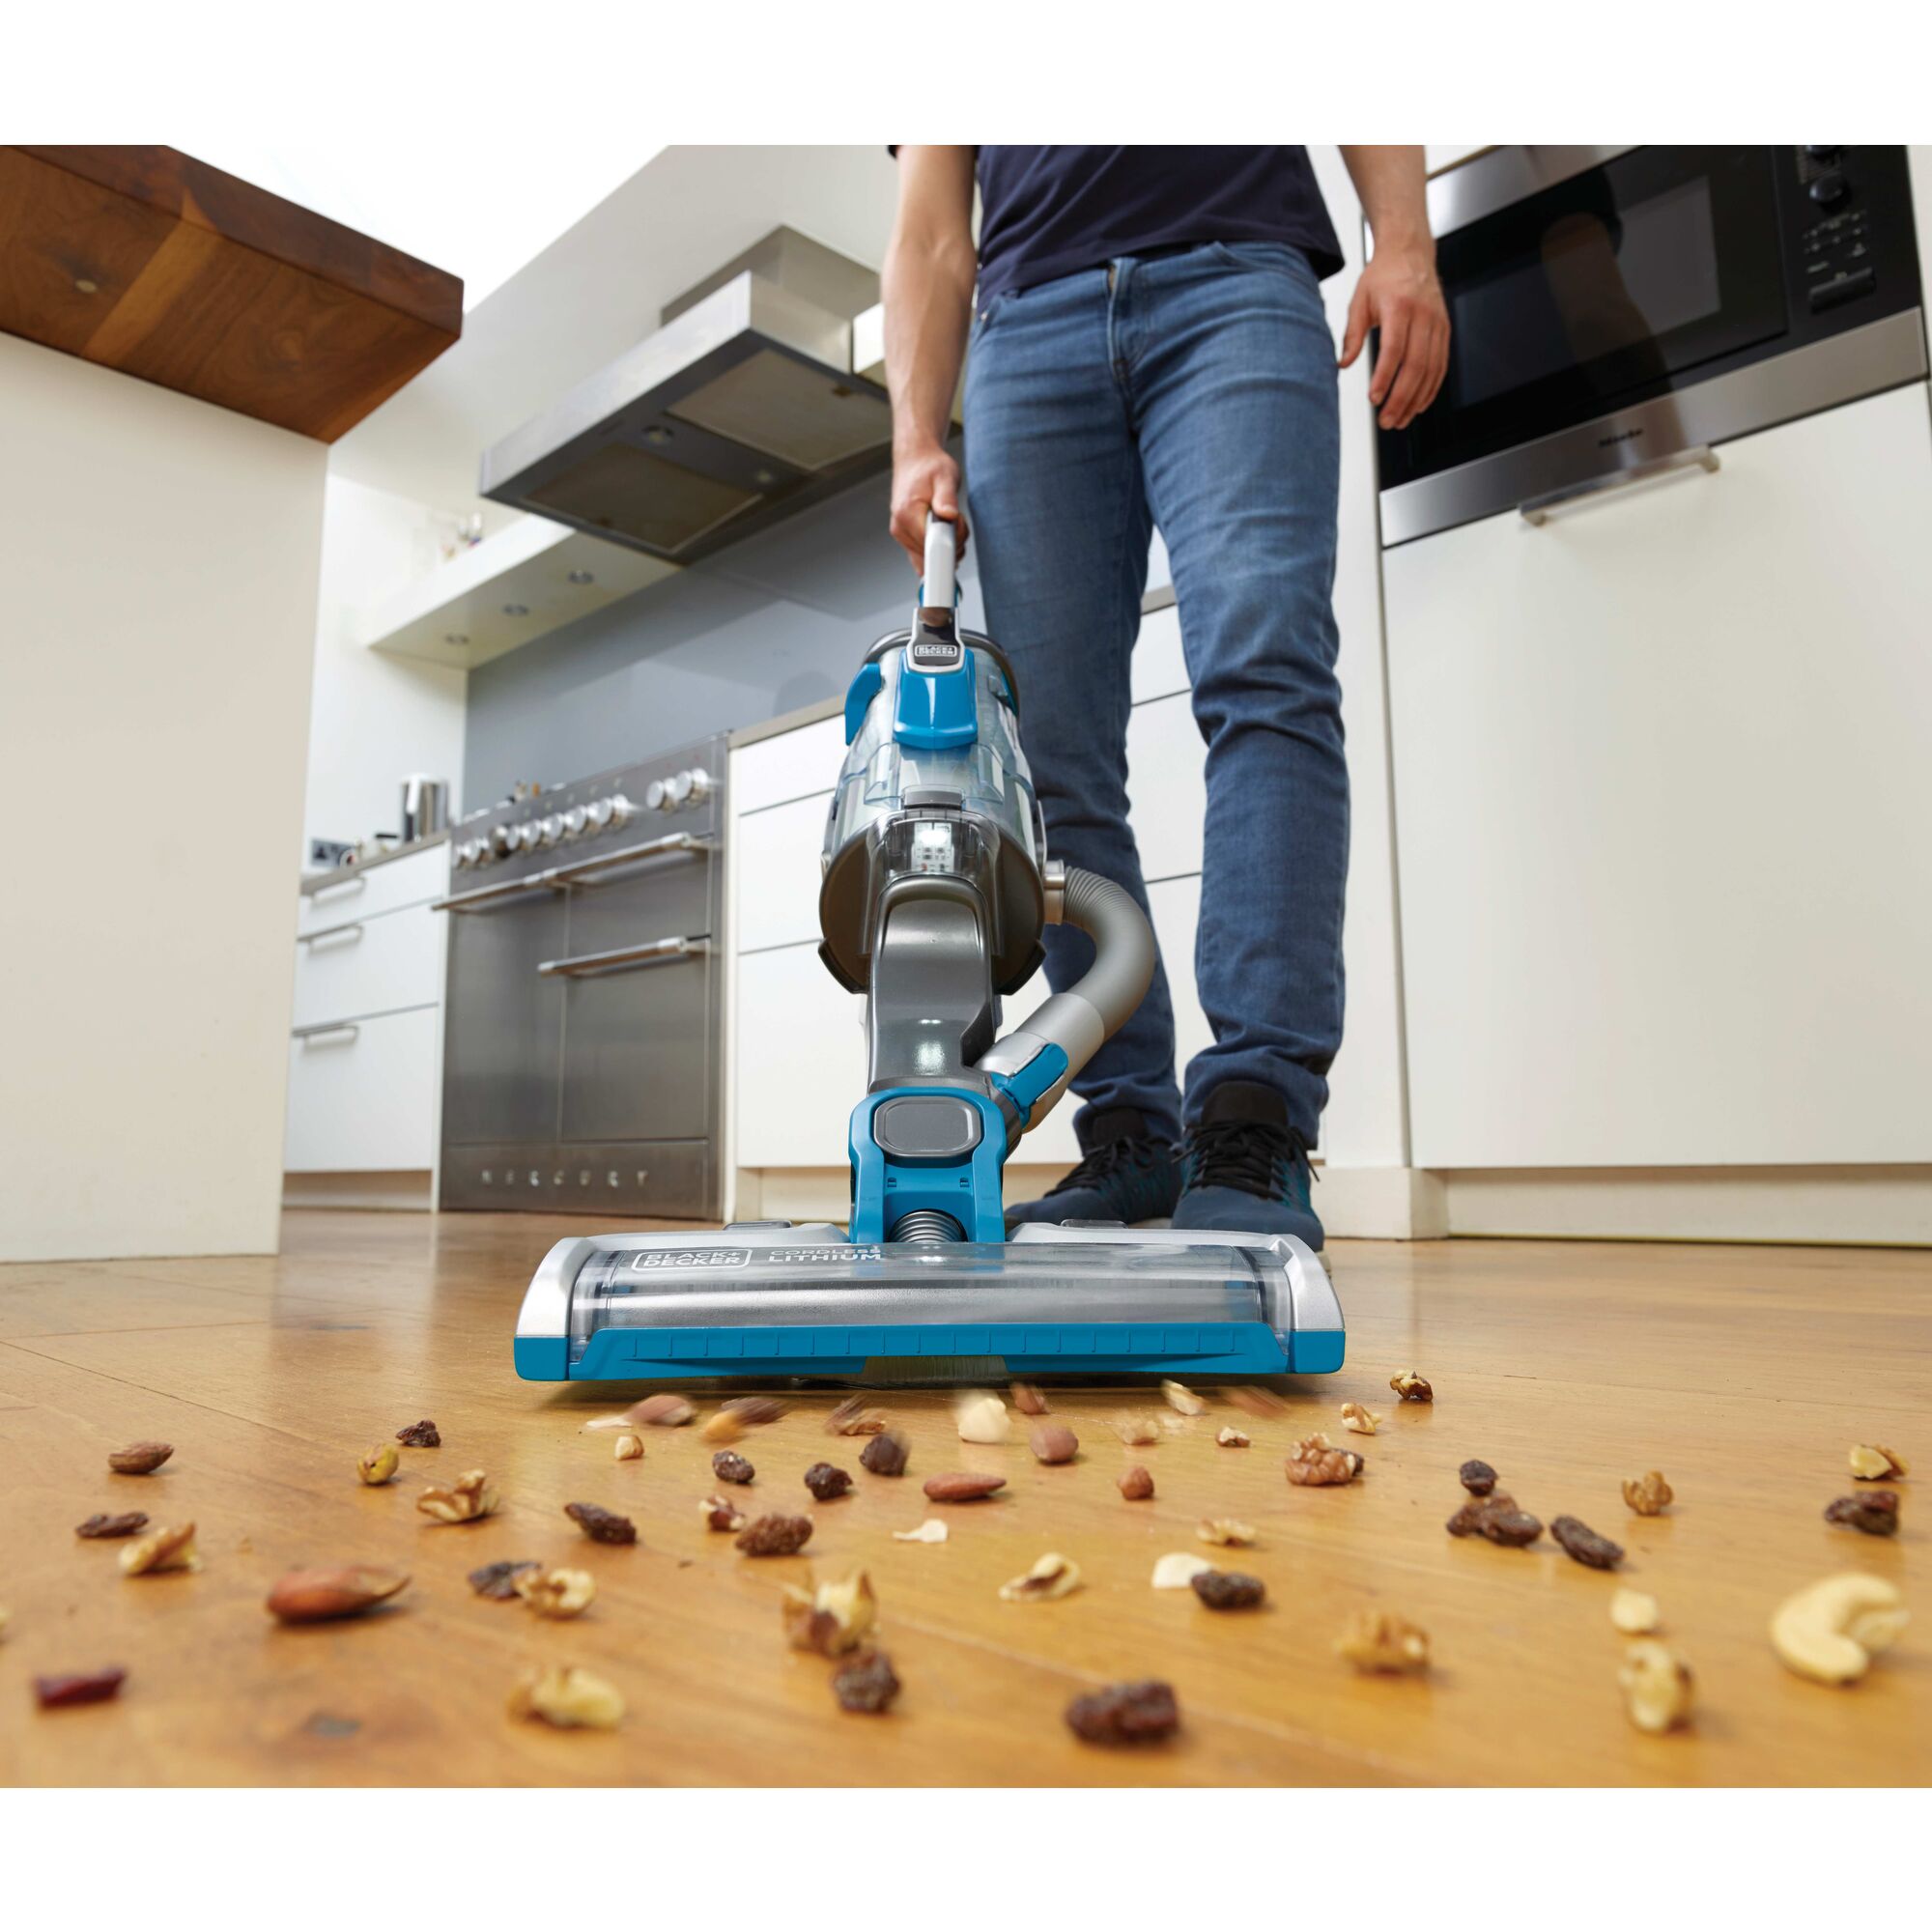 POWER SERIES PRO Cordless 2 in 1 Vacuum being used for cleaning spilled nuts from floor.